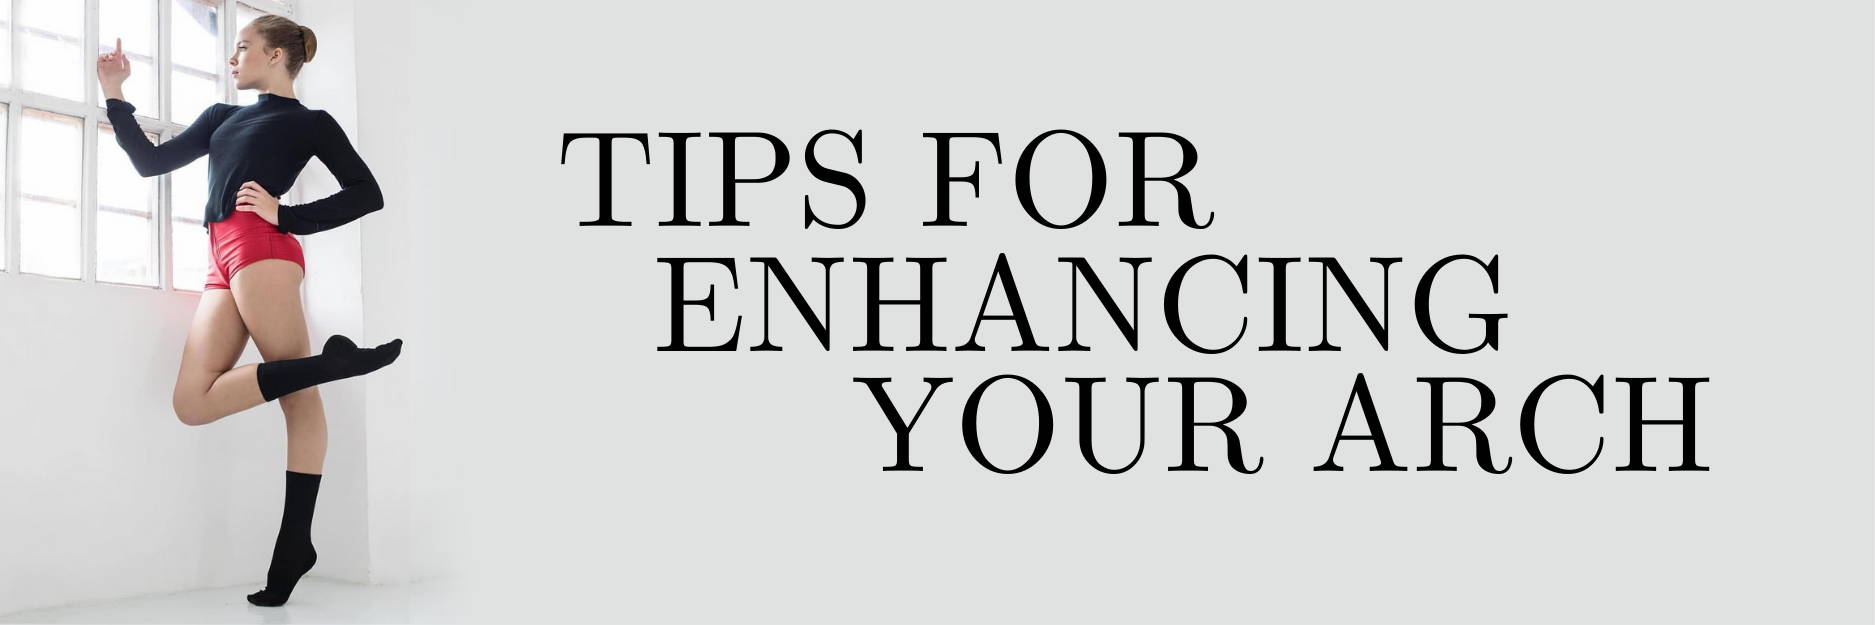 Tips For Enhancing Your Foot Arch for Dancers